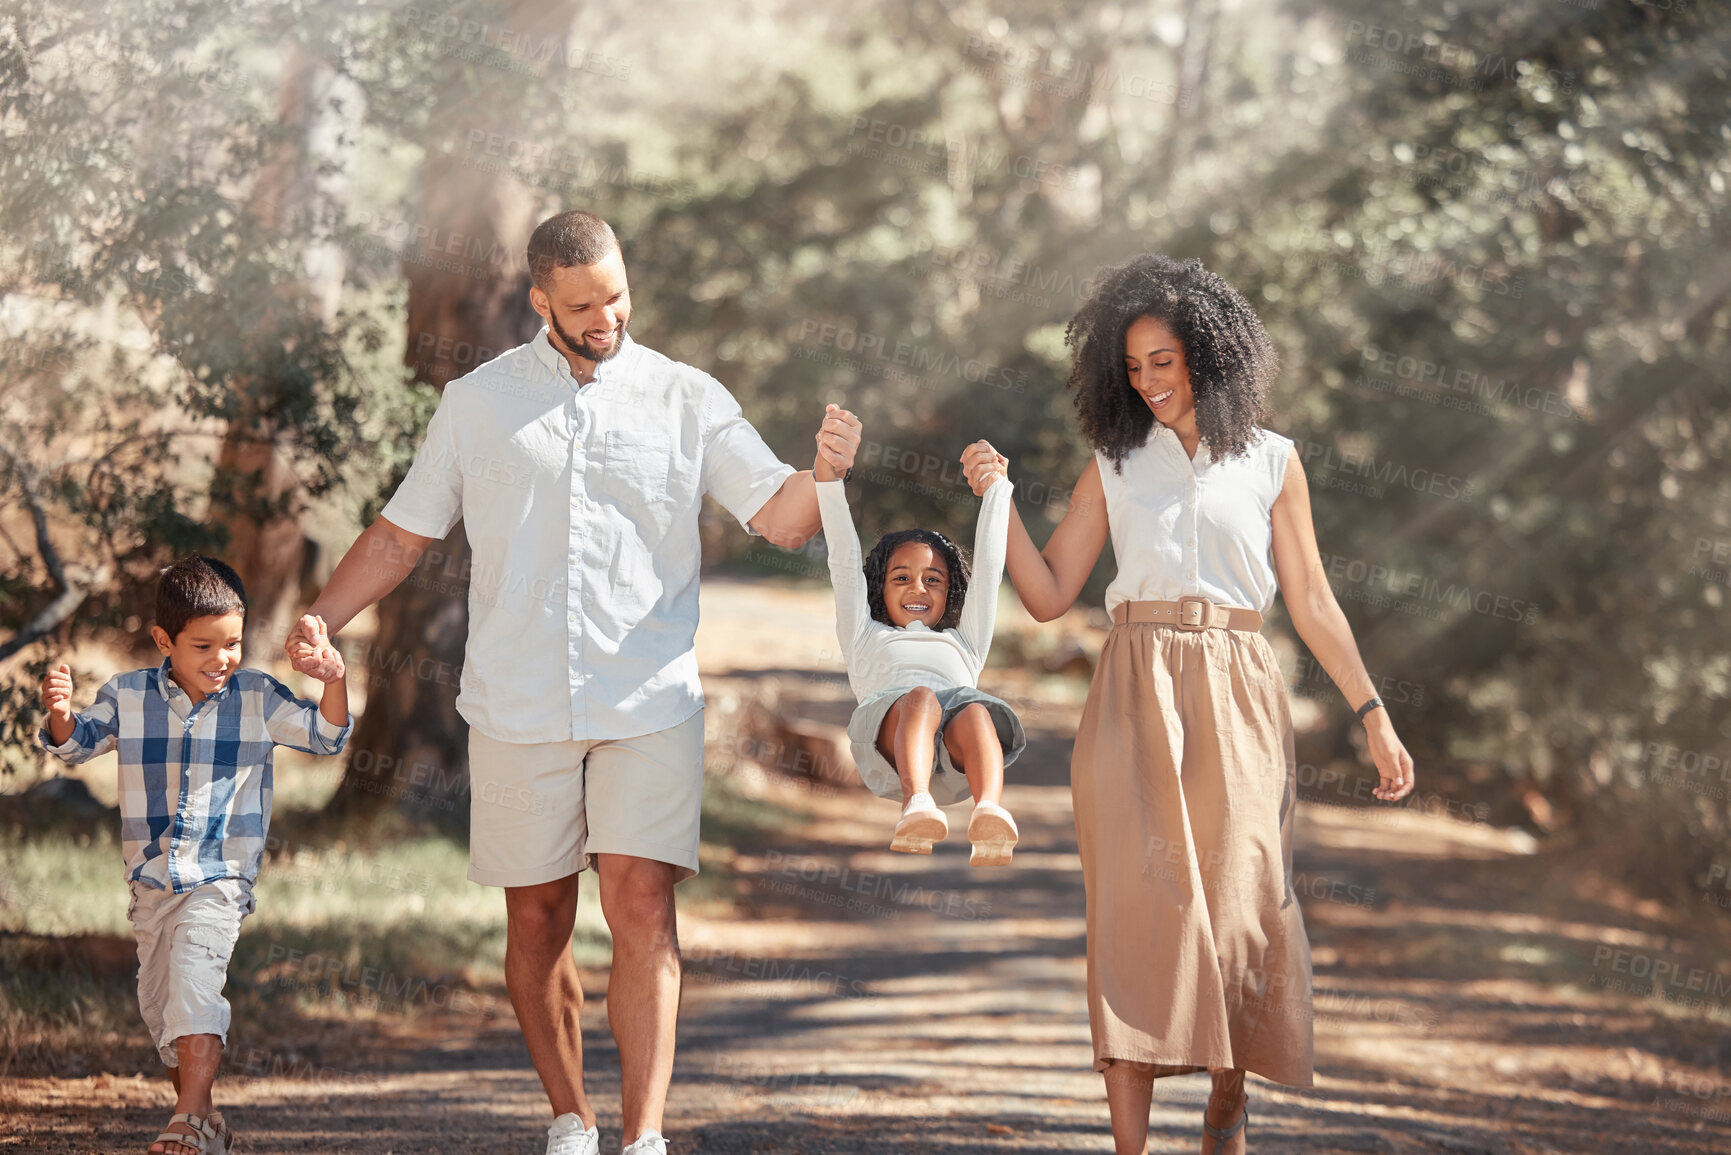 Buy stock photo Family, happy and park summer fun of a father, mother and children swinging on a nature path. Happiness of parents holding hands with kids together with love, smile and support outdoor walking